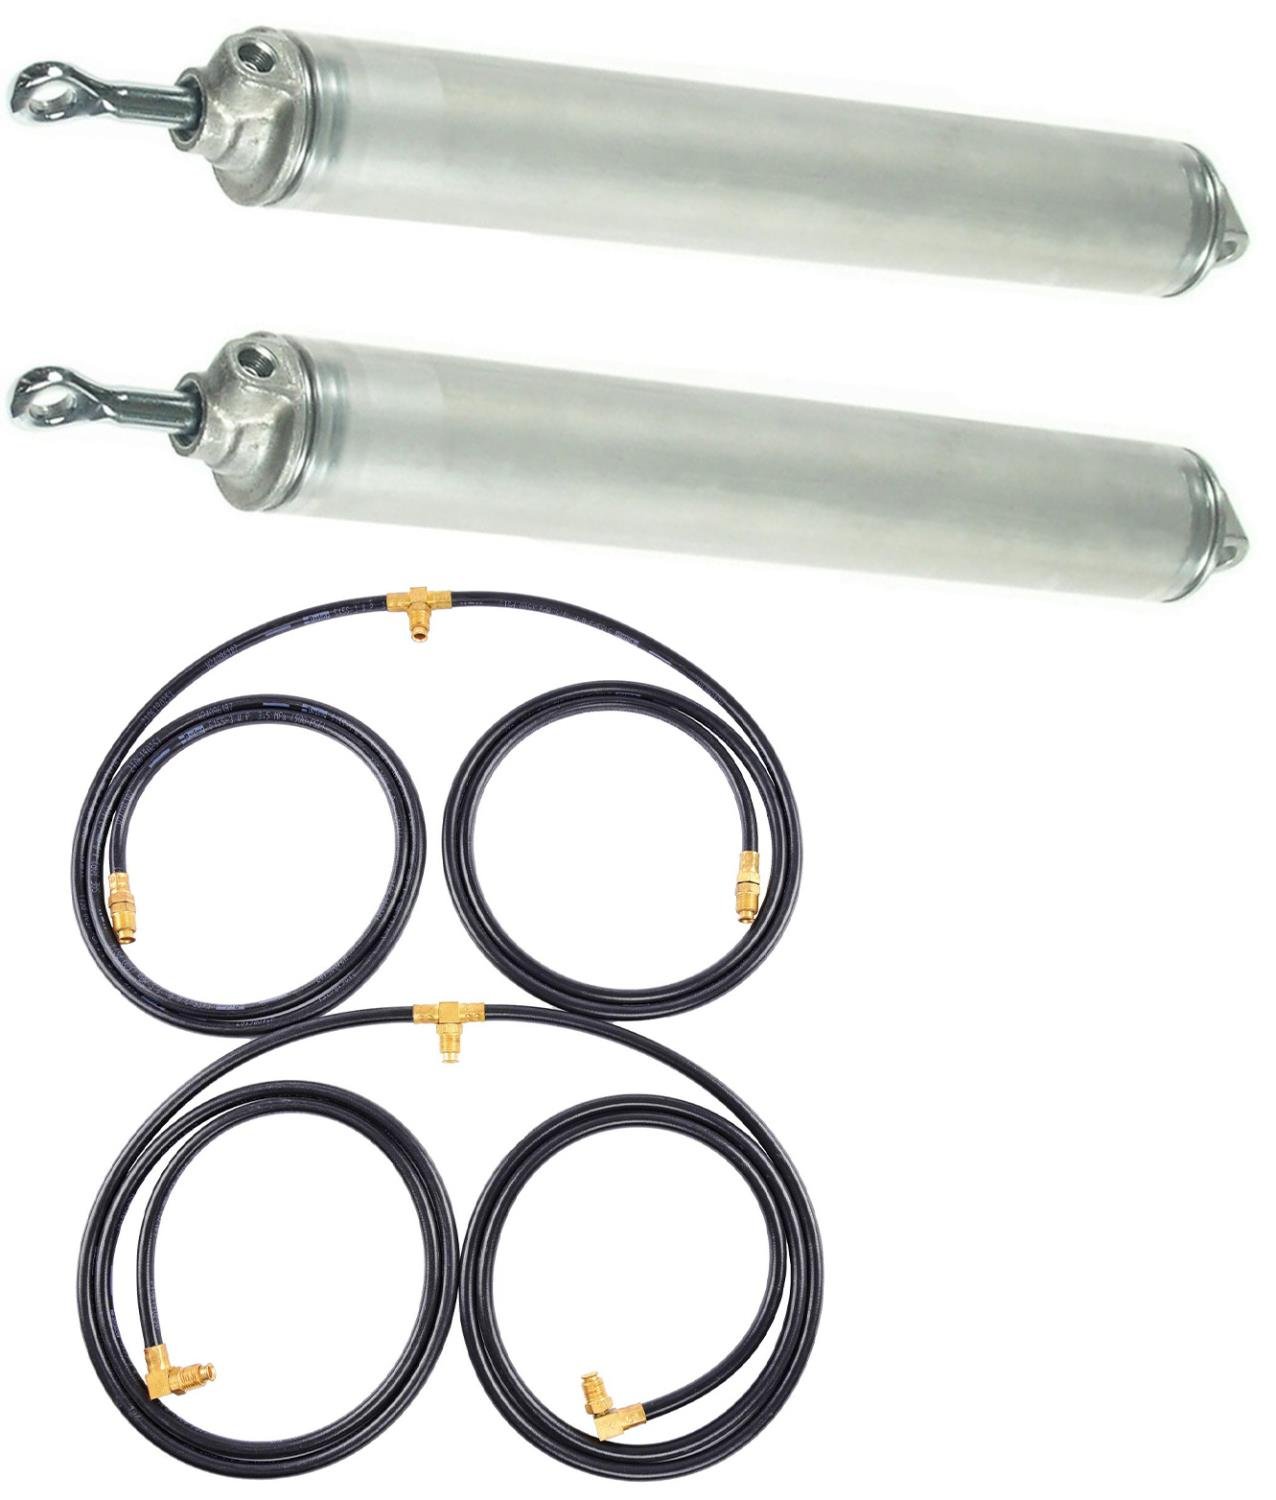 Convertible Top Cylinder & Hose Kit for 1959-1960 Buick, Cadillac, Chevrolet, Oldsmobile, Full-Size Convertibles [Sold as a Kit]